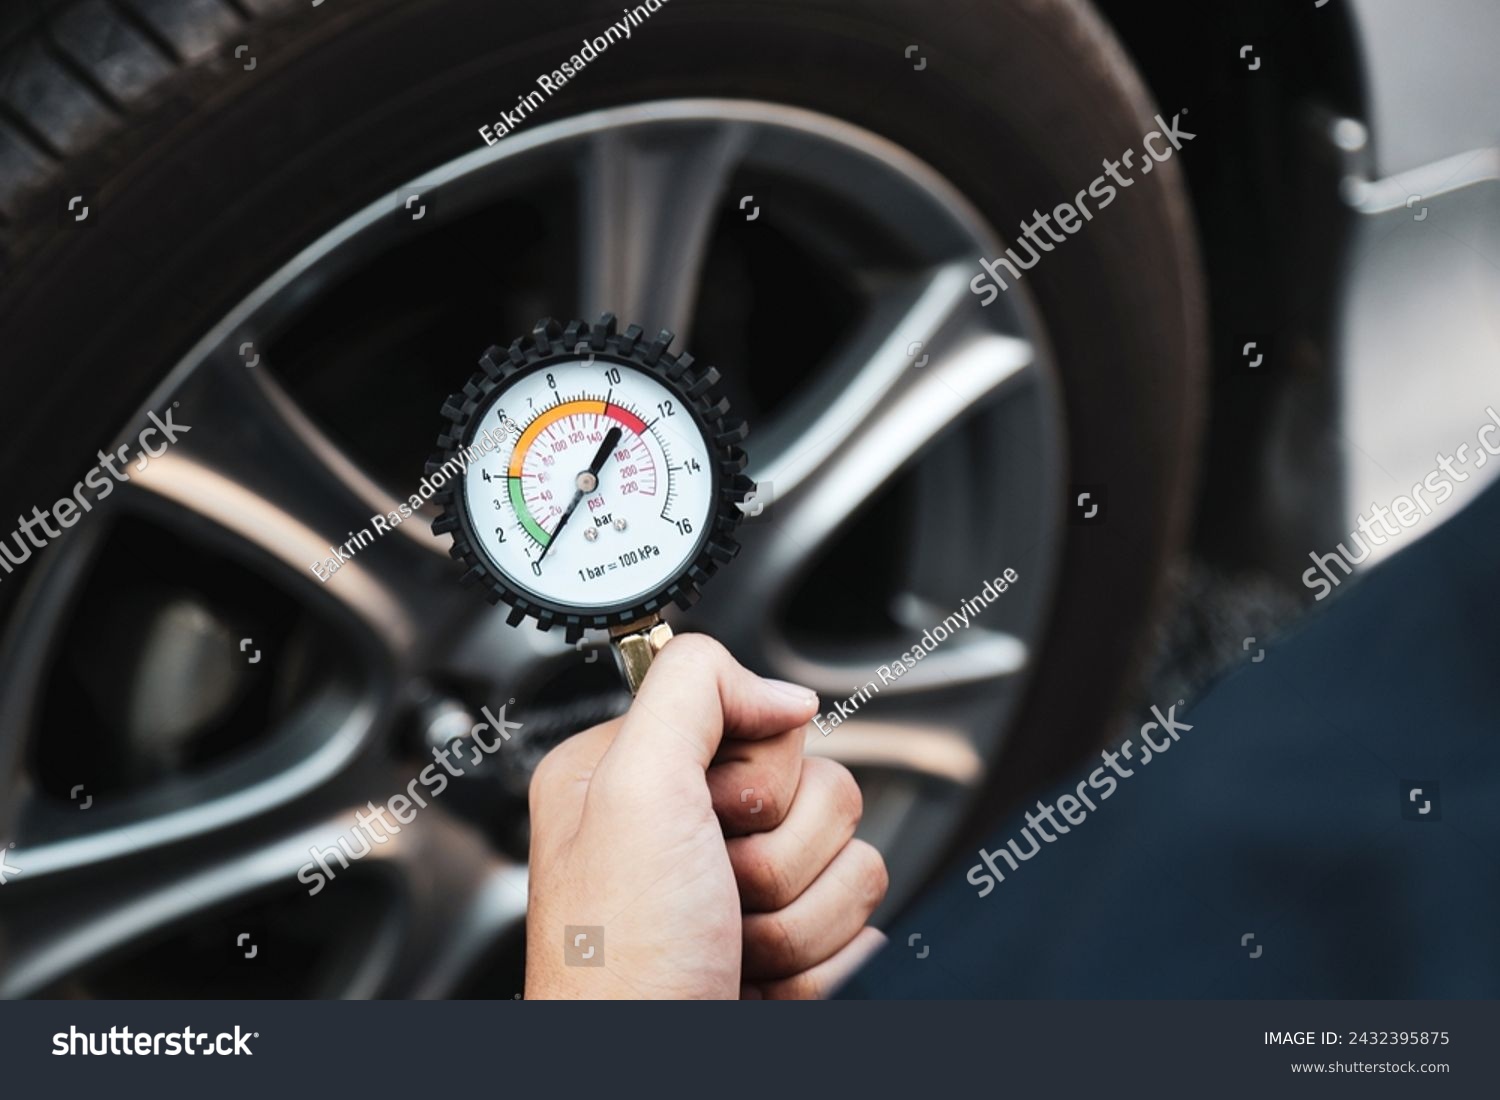 Hand car mechanic holding car tire pressure check equipment tool to checking low tire pressure inflating tires to or refill or air inflate to safety and car care service maintenance inspection. #2432395875